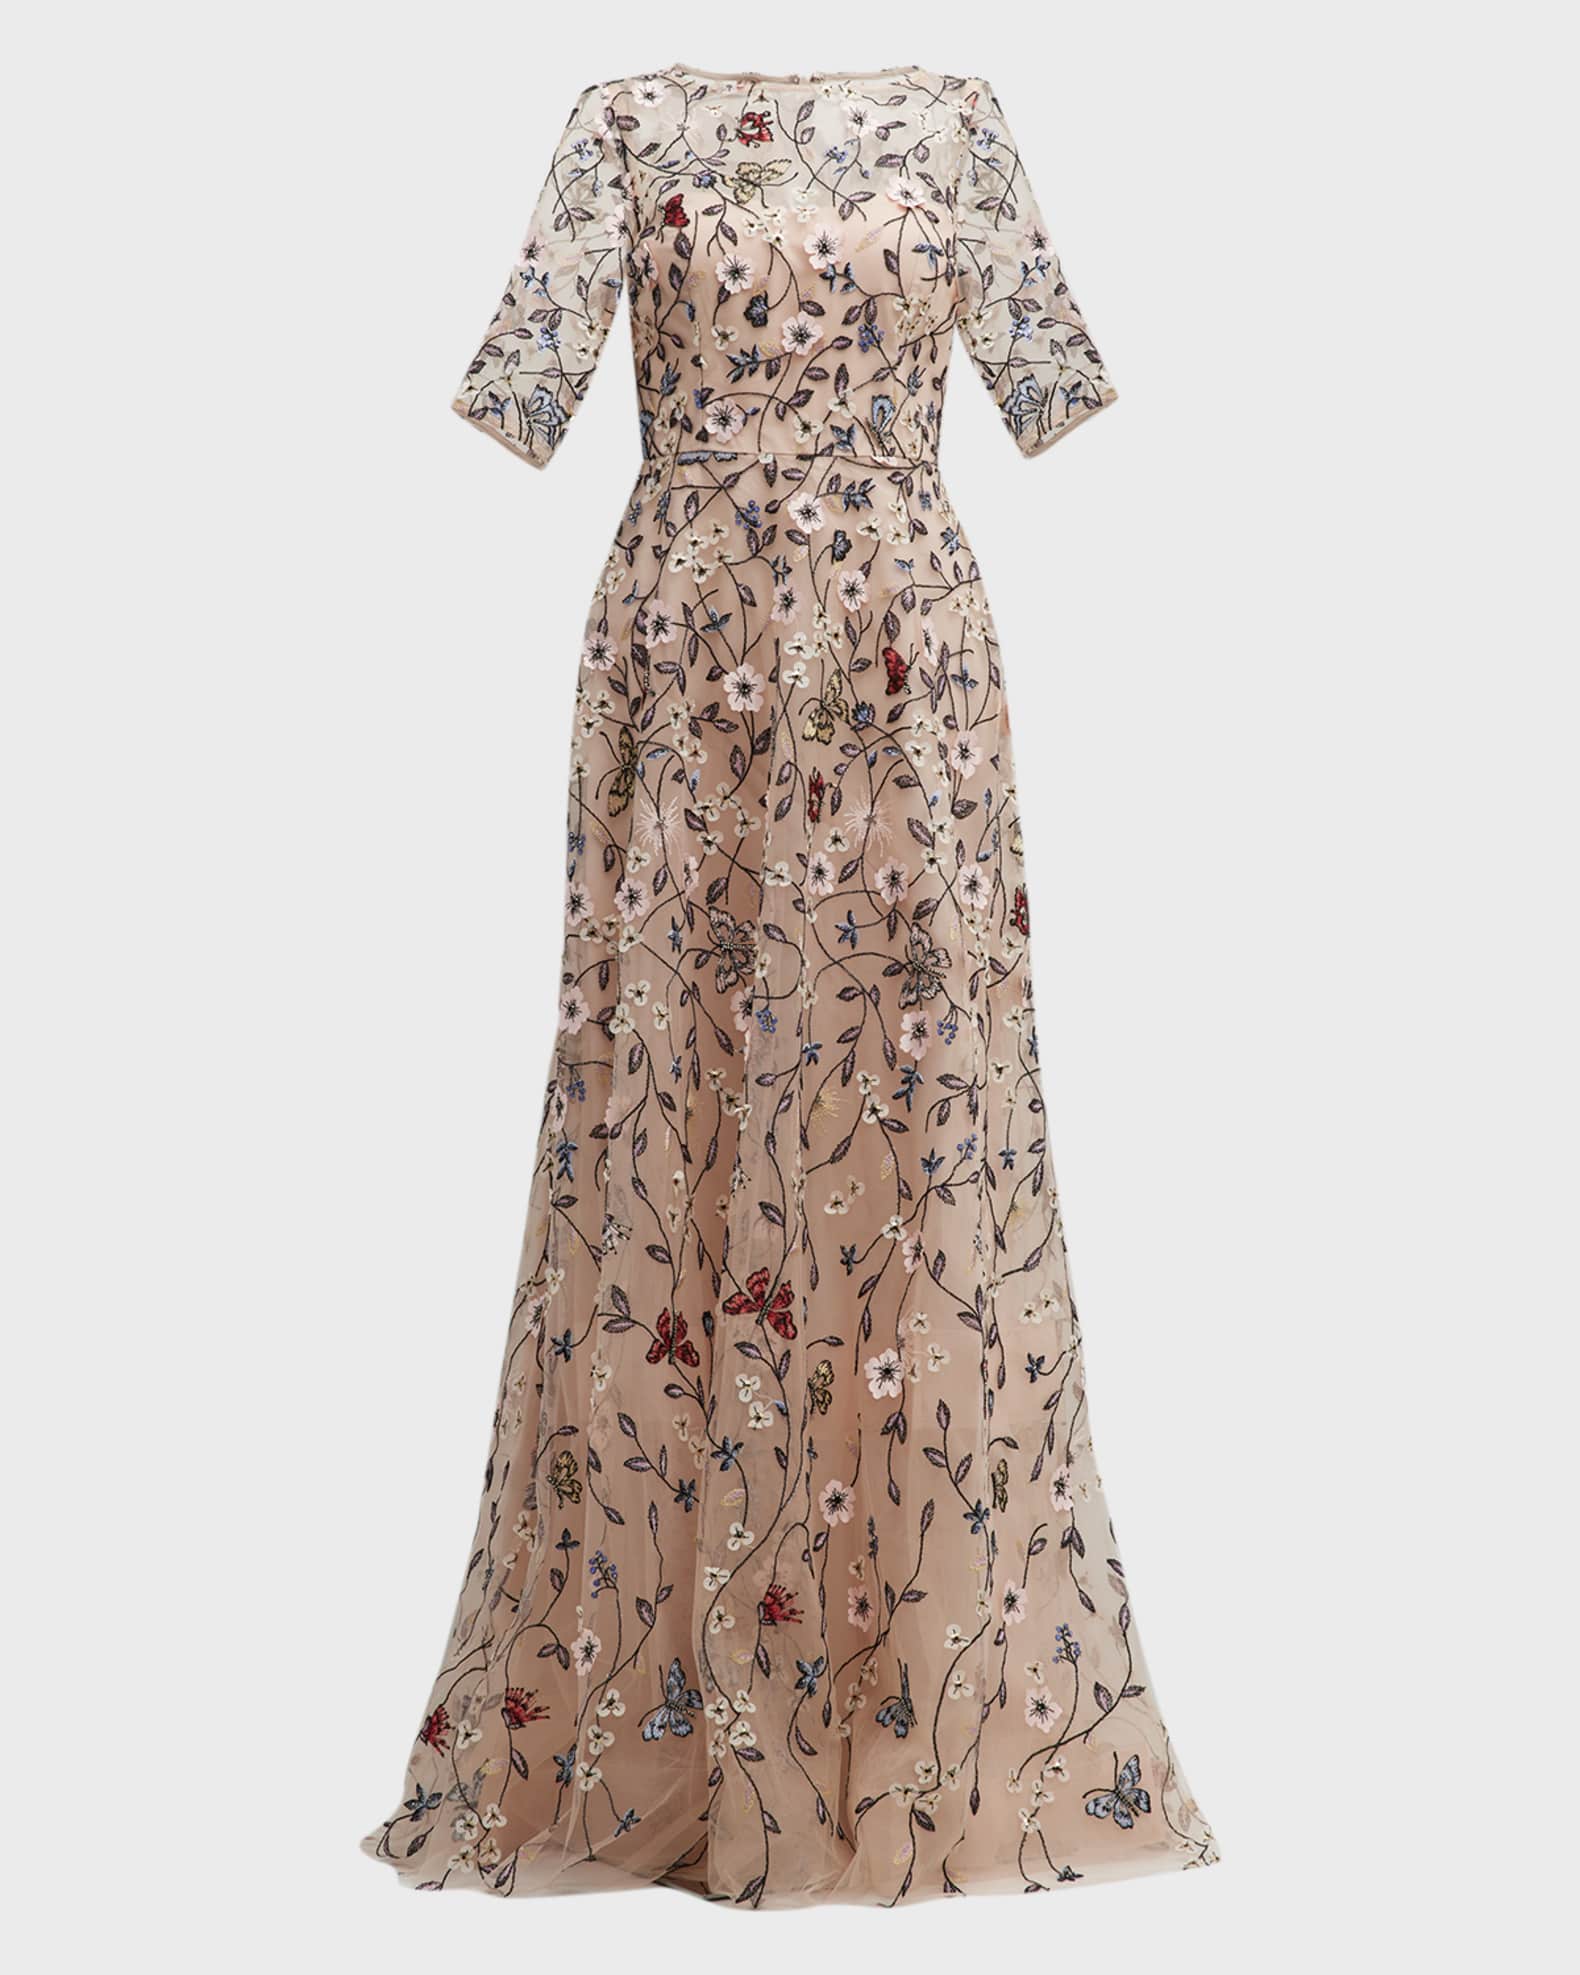 Rickie Freeman for Teri Jon Floral Vine Embroidered Tulle Illusion Gown ...